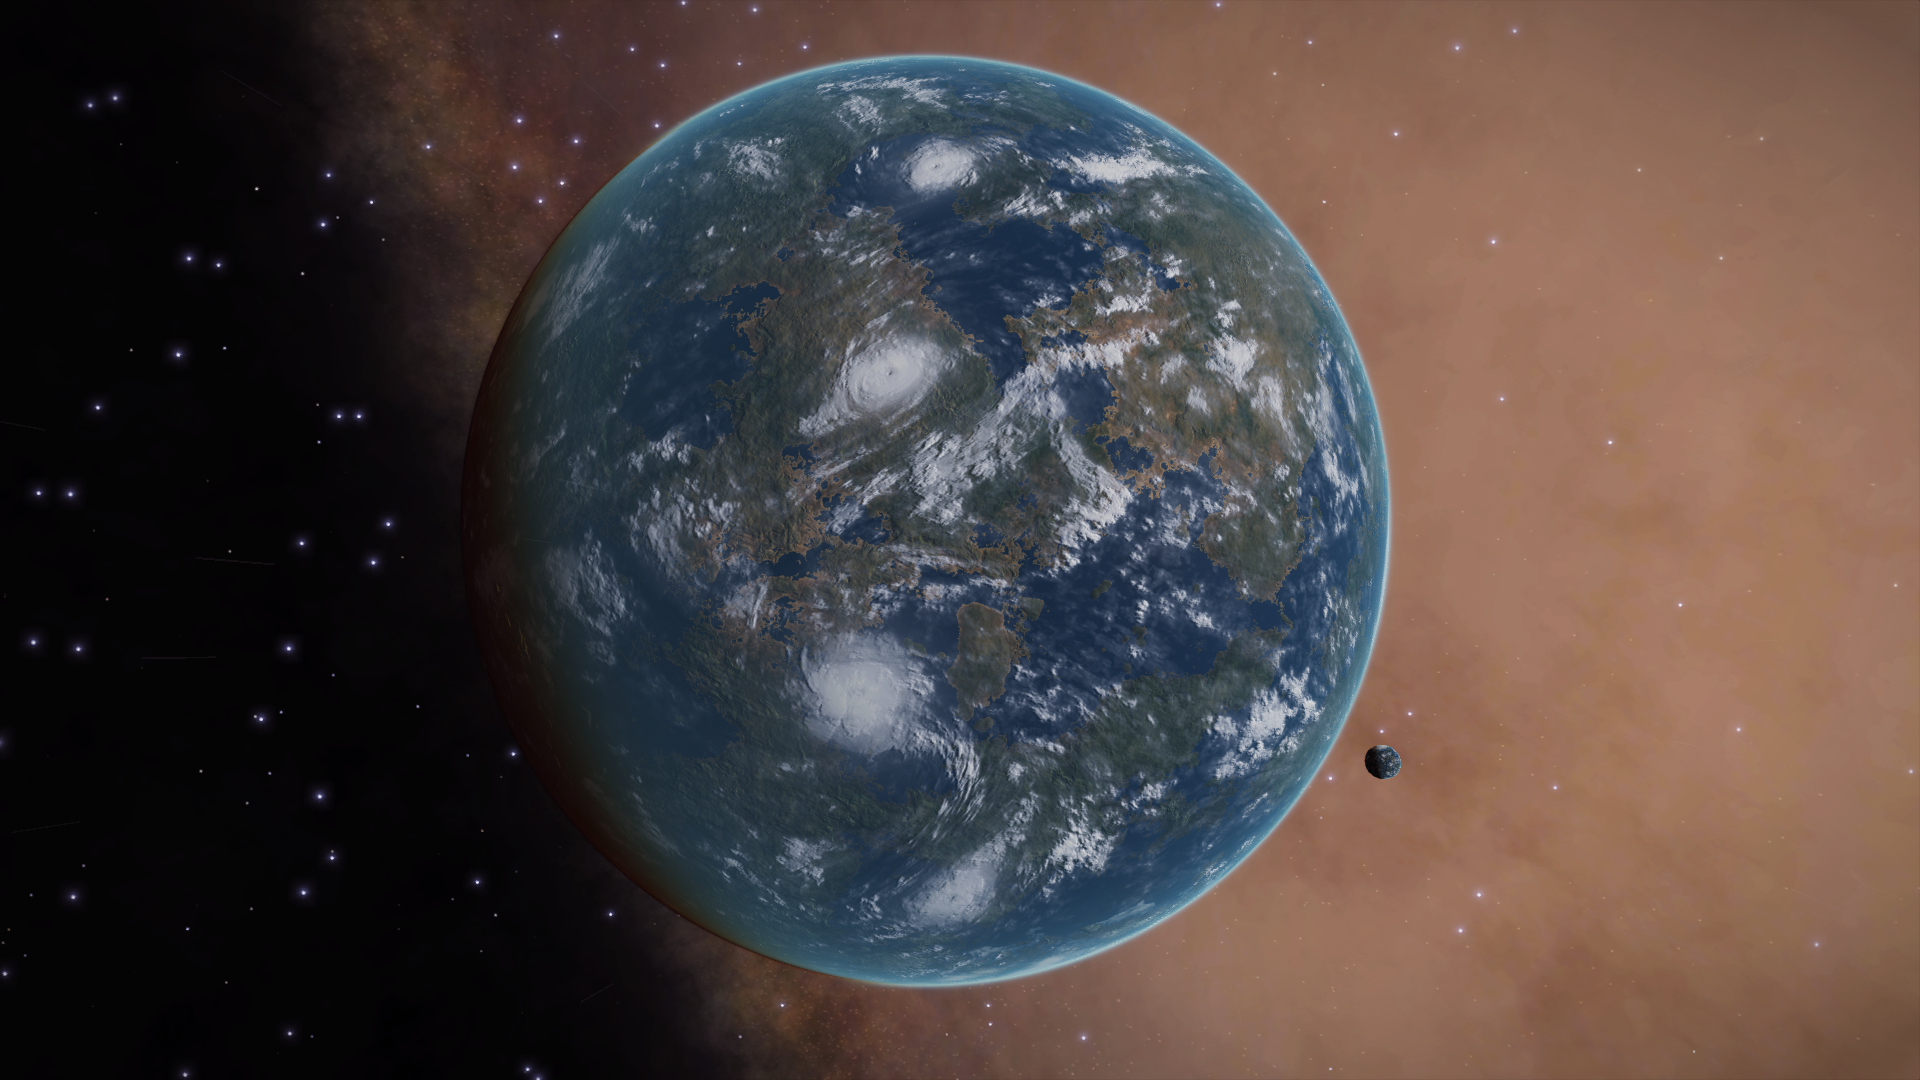 Yes, the little blue dot is another ELW